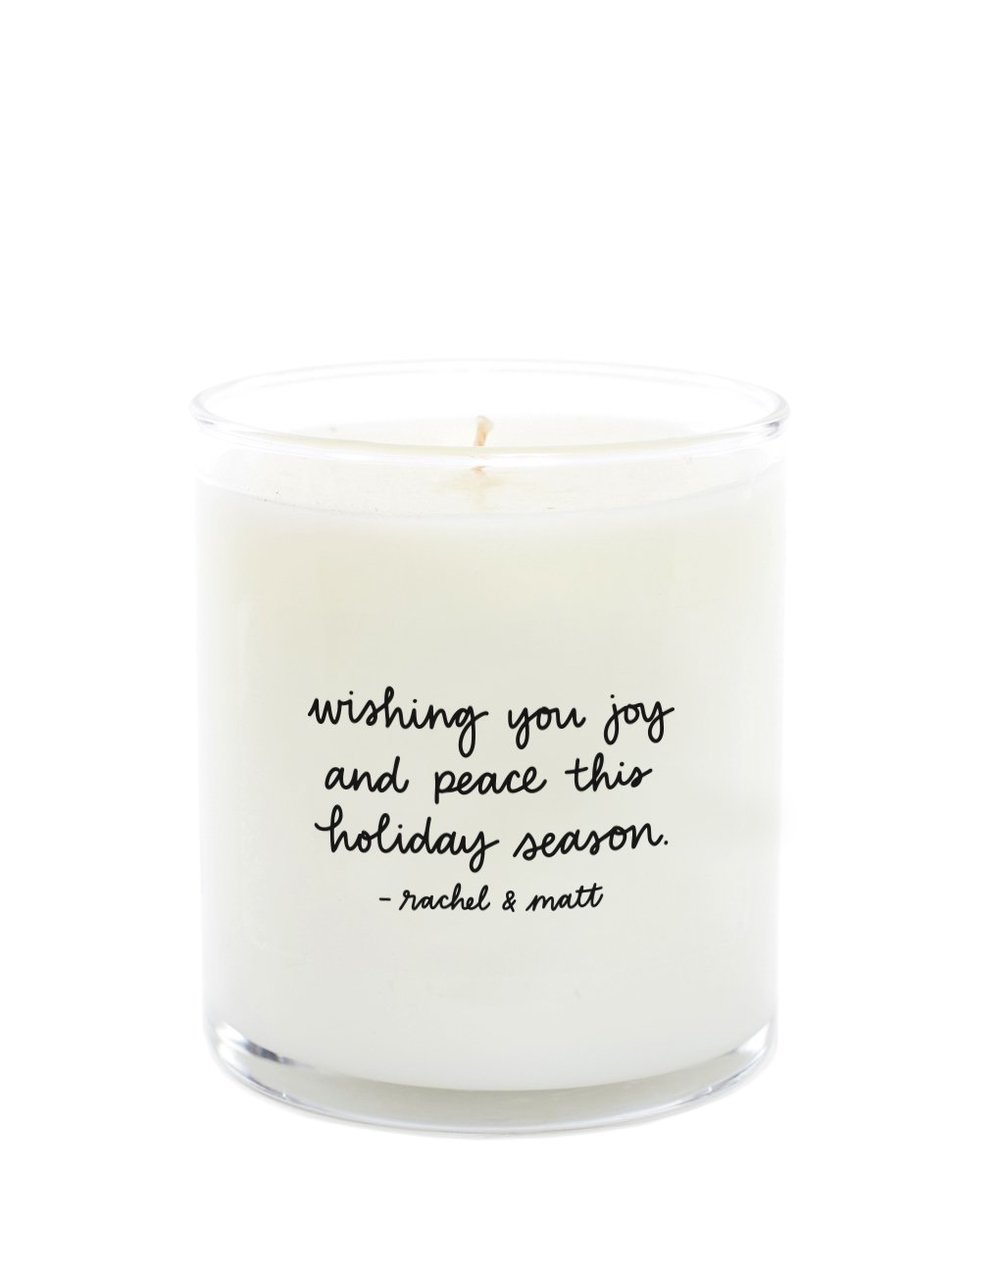  Show your loved ones you care by writing a special message on a  personalized candle by The Little Market  